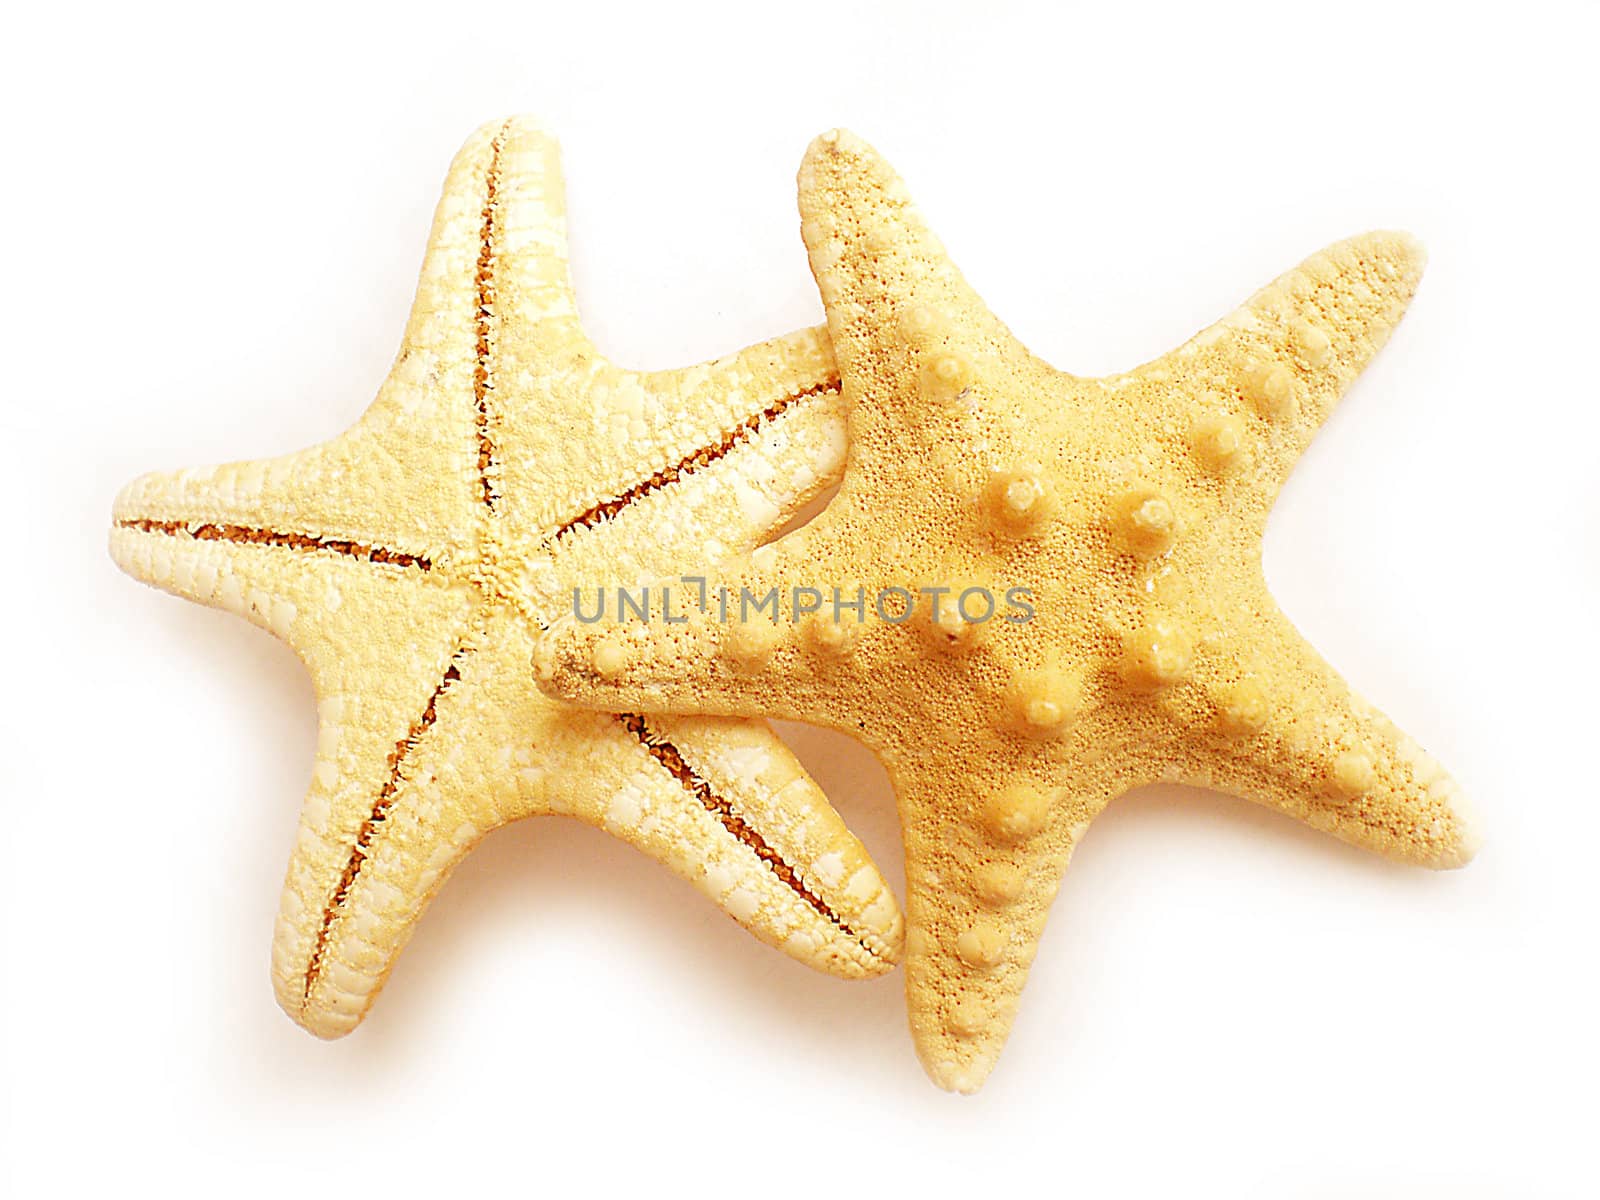 star fish isolated on white background